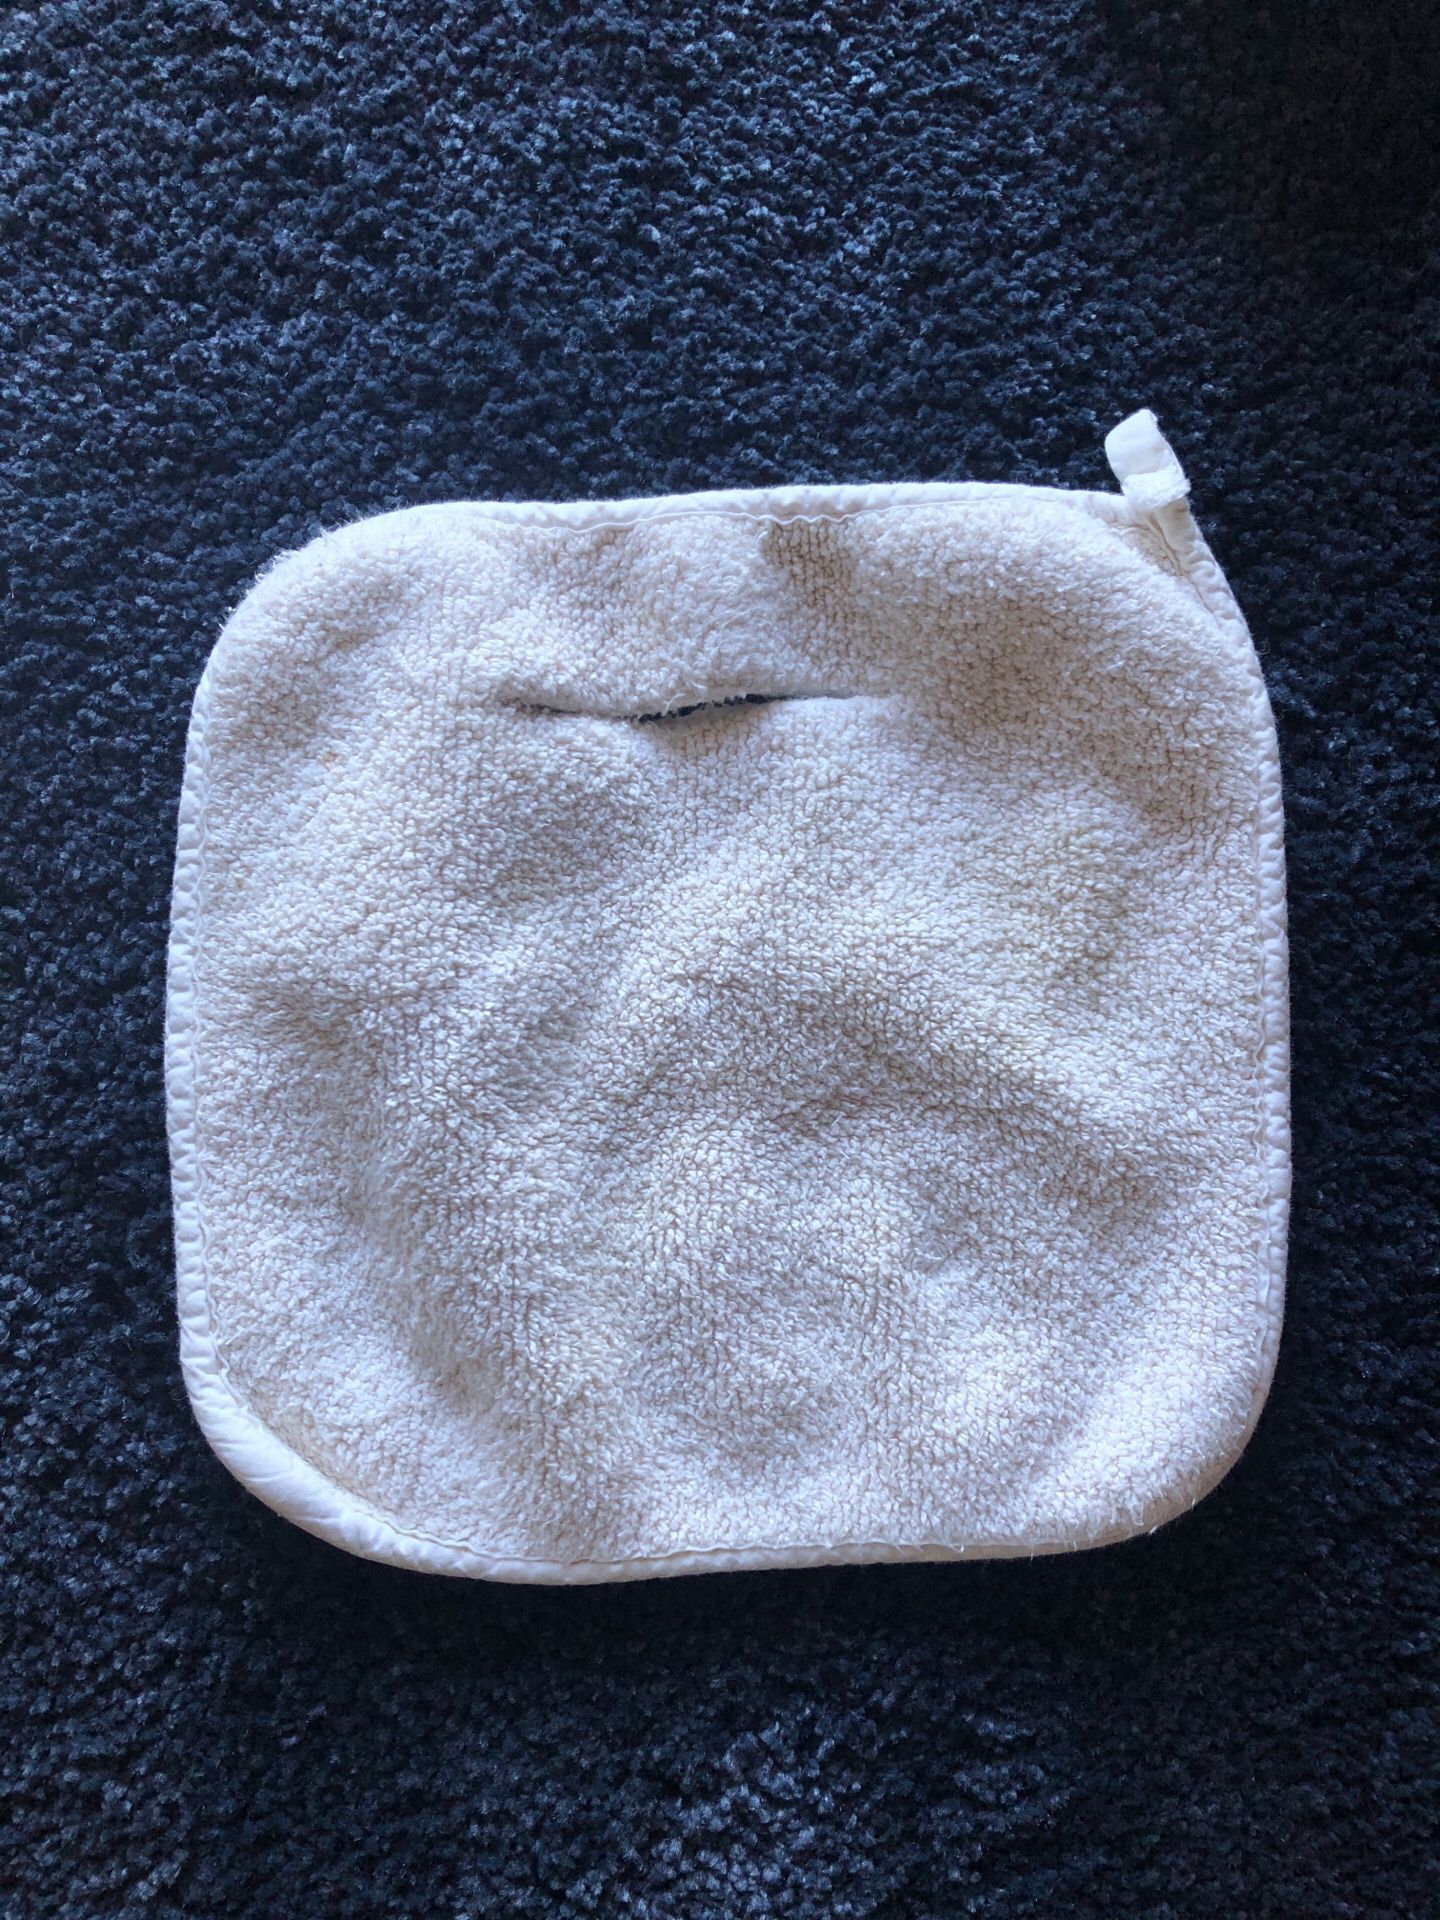 Pampered Chef Kathleen - Were you a fan of our double terry cloth oven mitts????  THEY ARE AT THE ONLINE OUTLET FOR ONLY $9!!! That's 1/2 price! Sign in at  www.pamperedchef.biz/kathleenblack Click